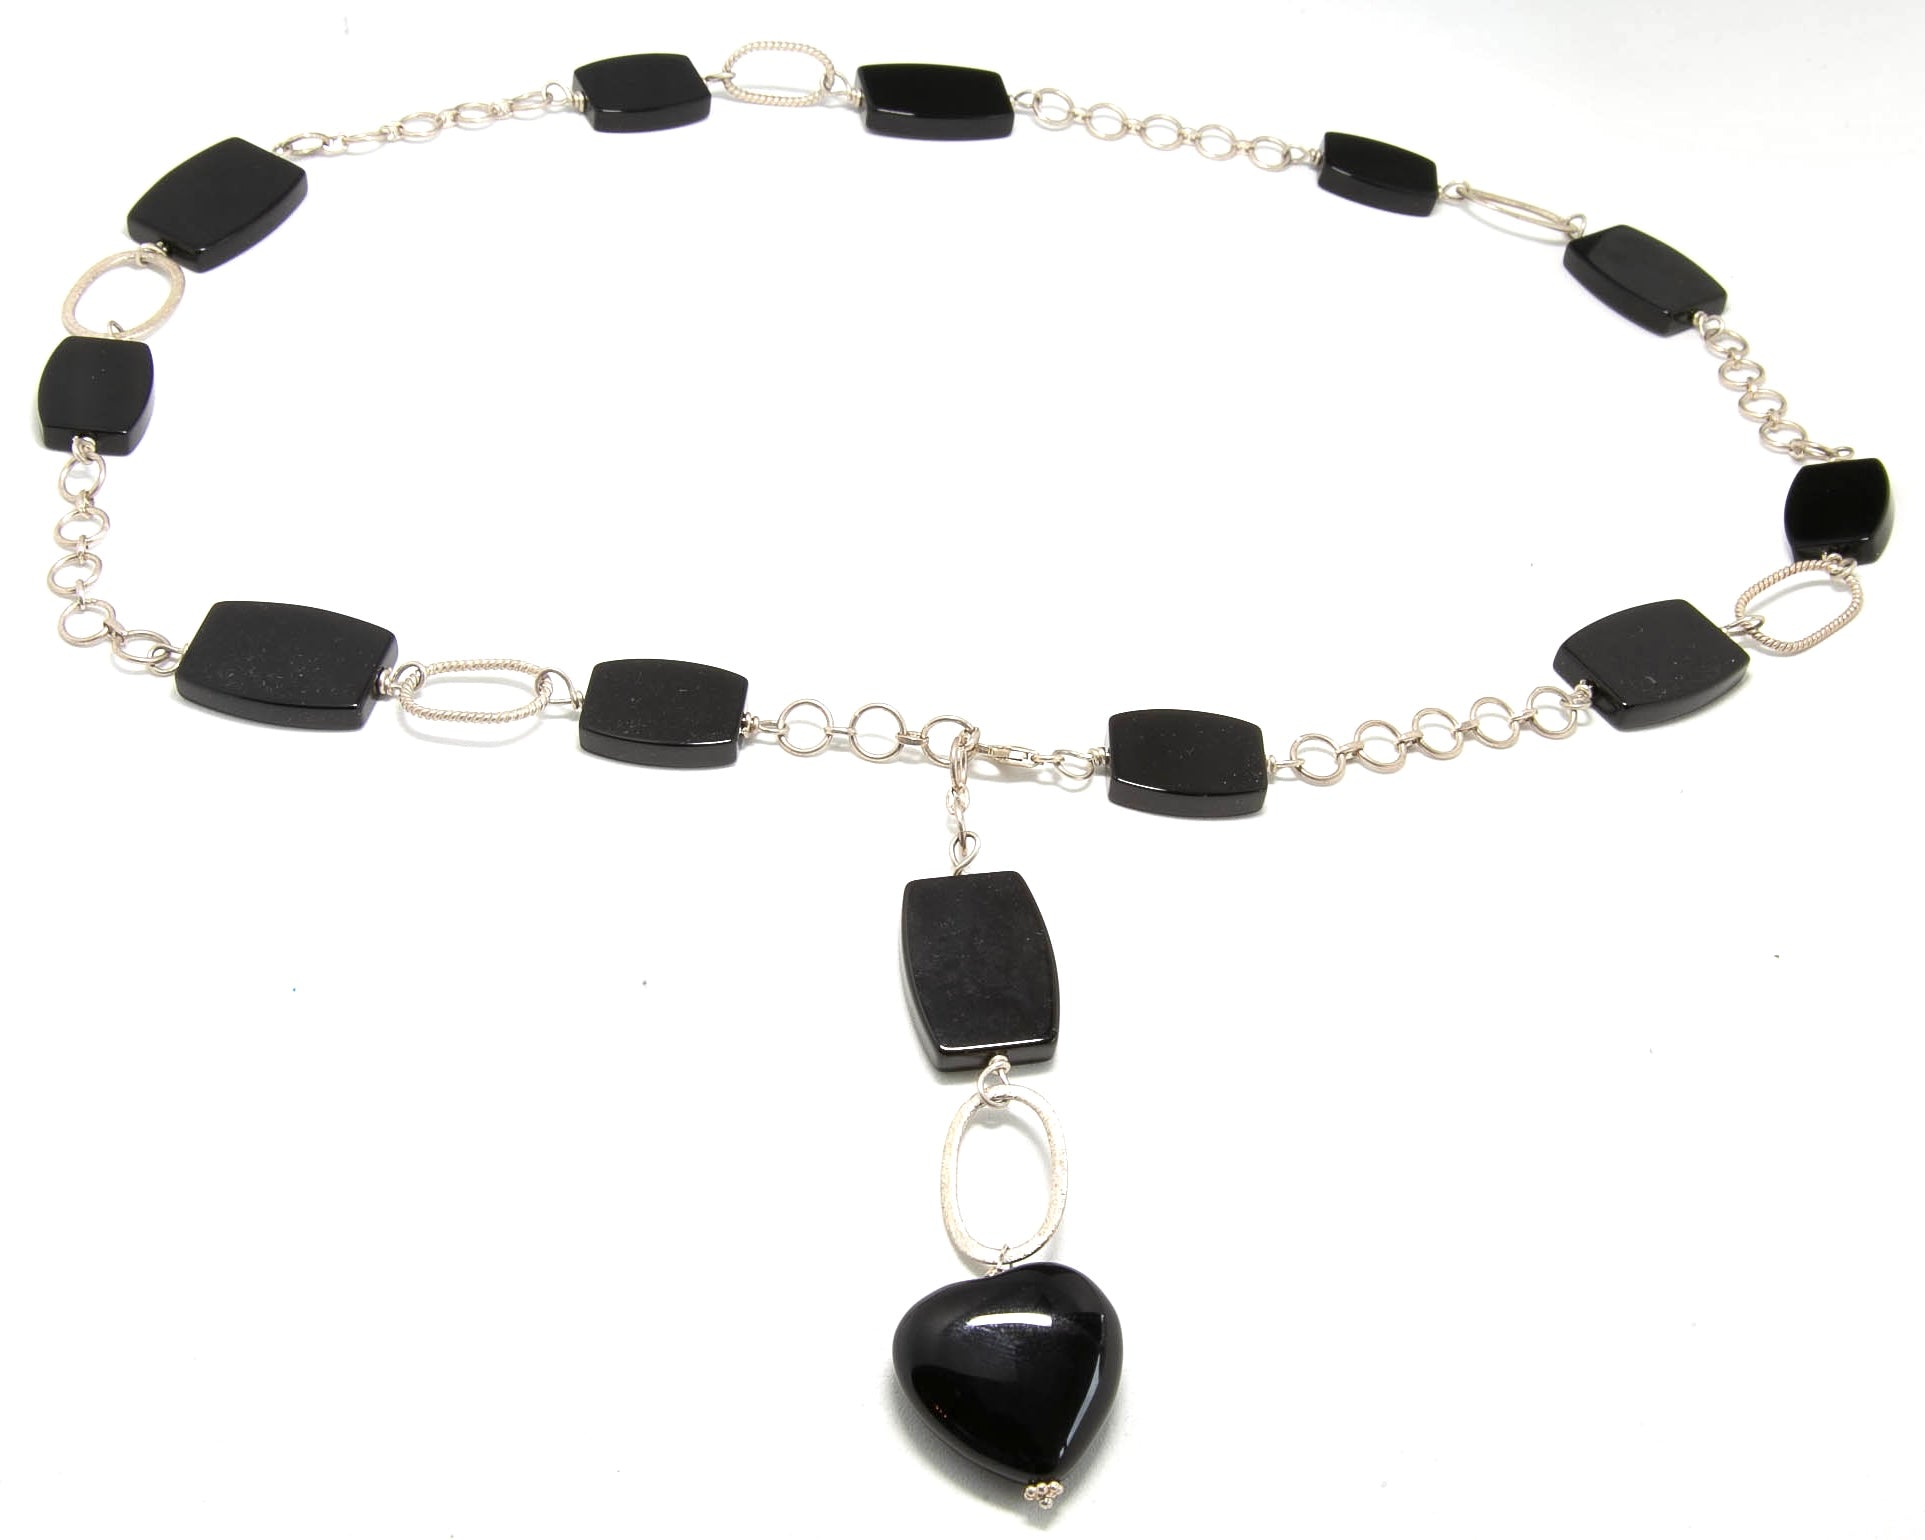 Black onyx rectangle stones connected with sterling silver chain with an onyx heart dangling. Front closure allows for adjustment based on neckline.